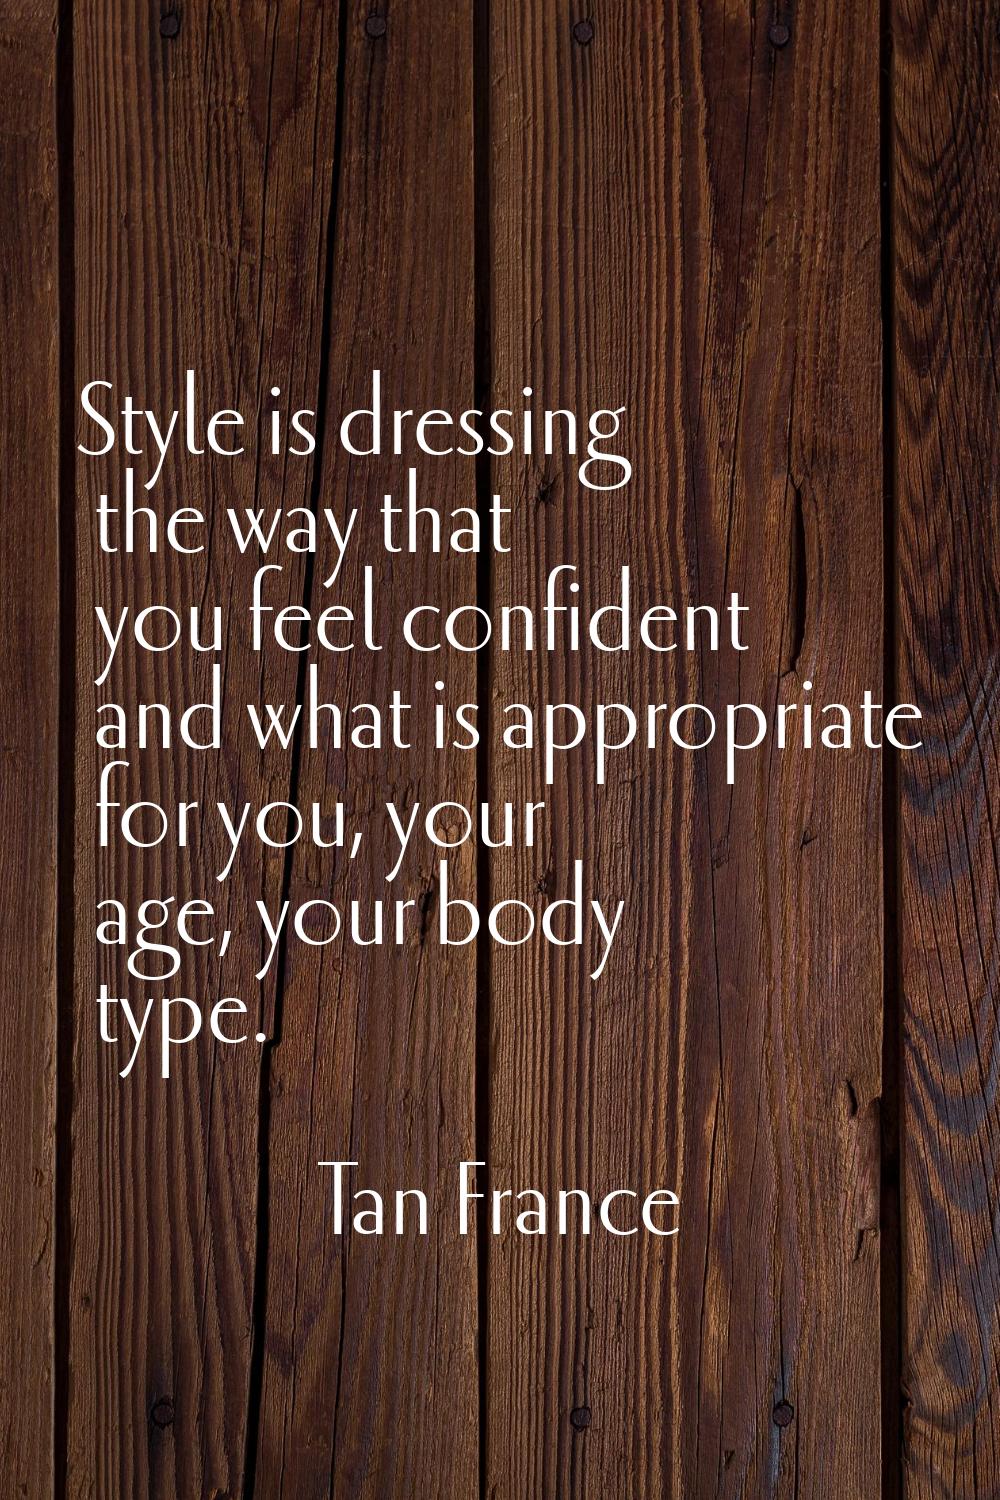 Style is dressing the way that you feel confident and what is appropriate for you, your age, your b